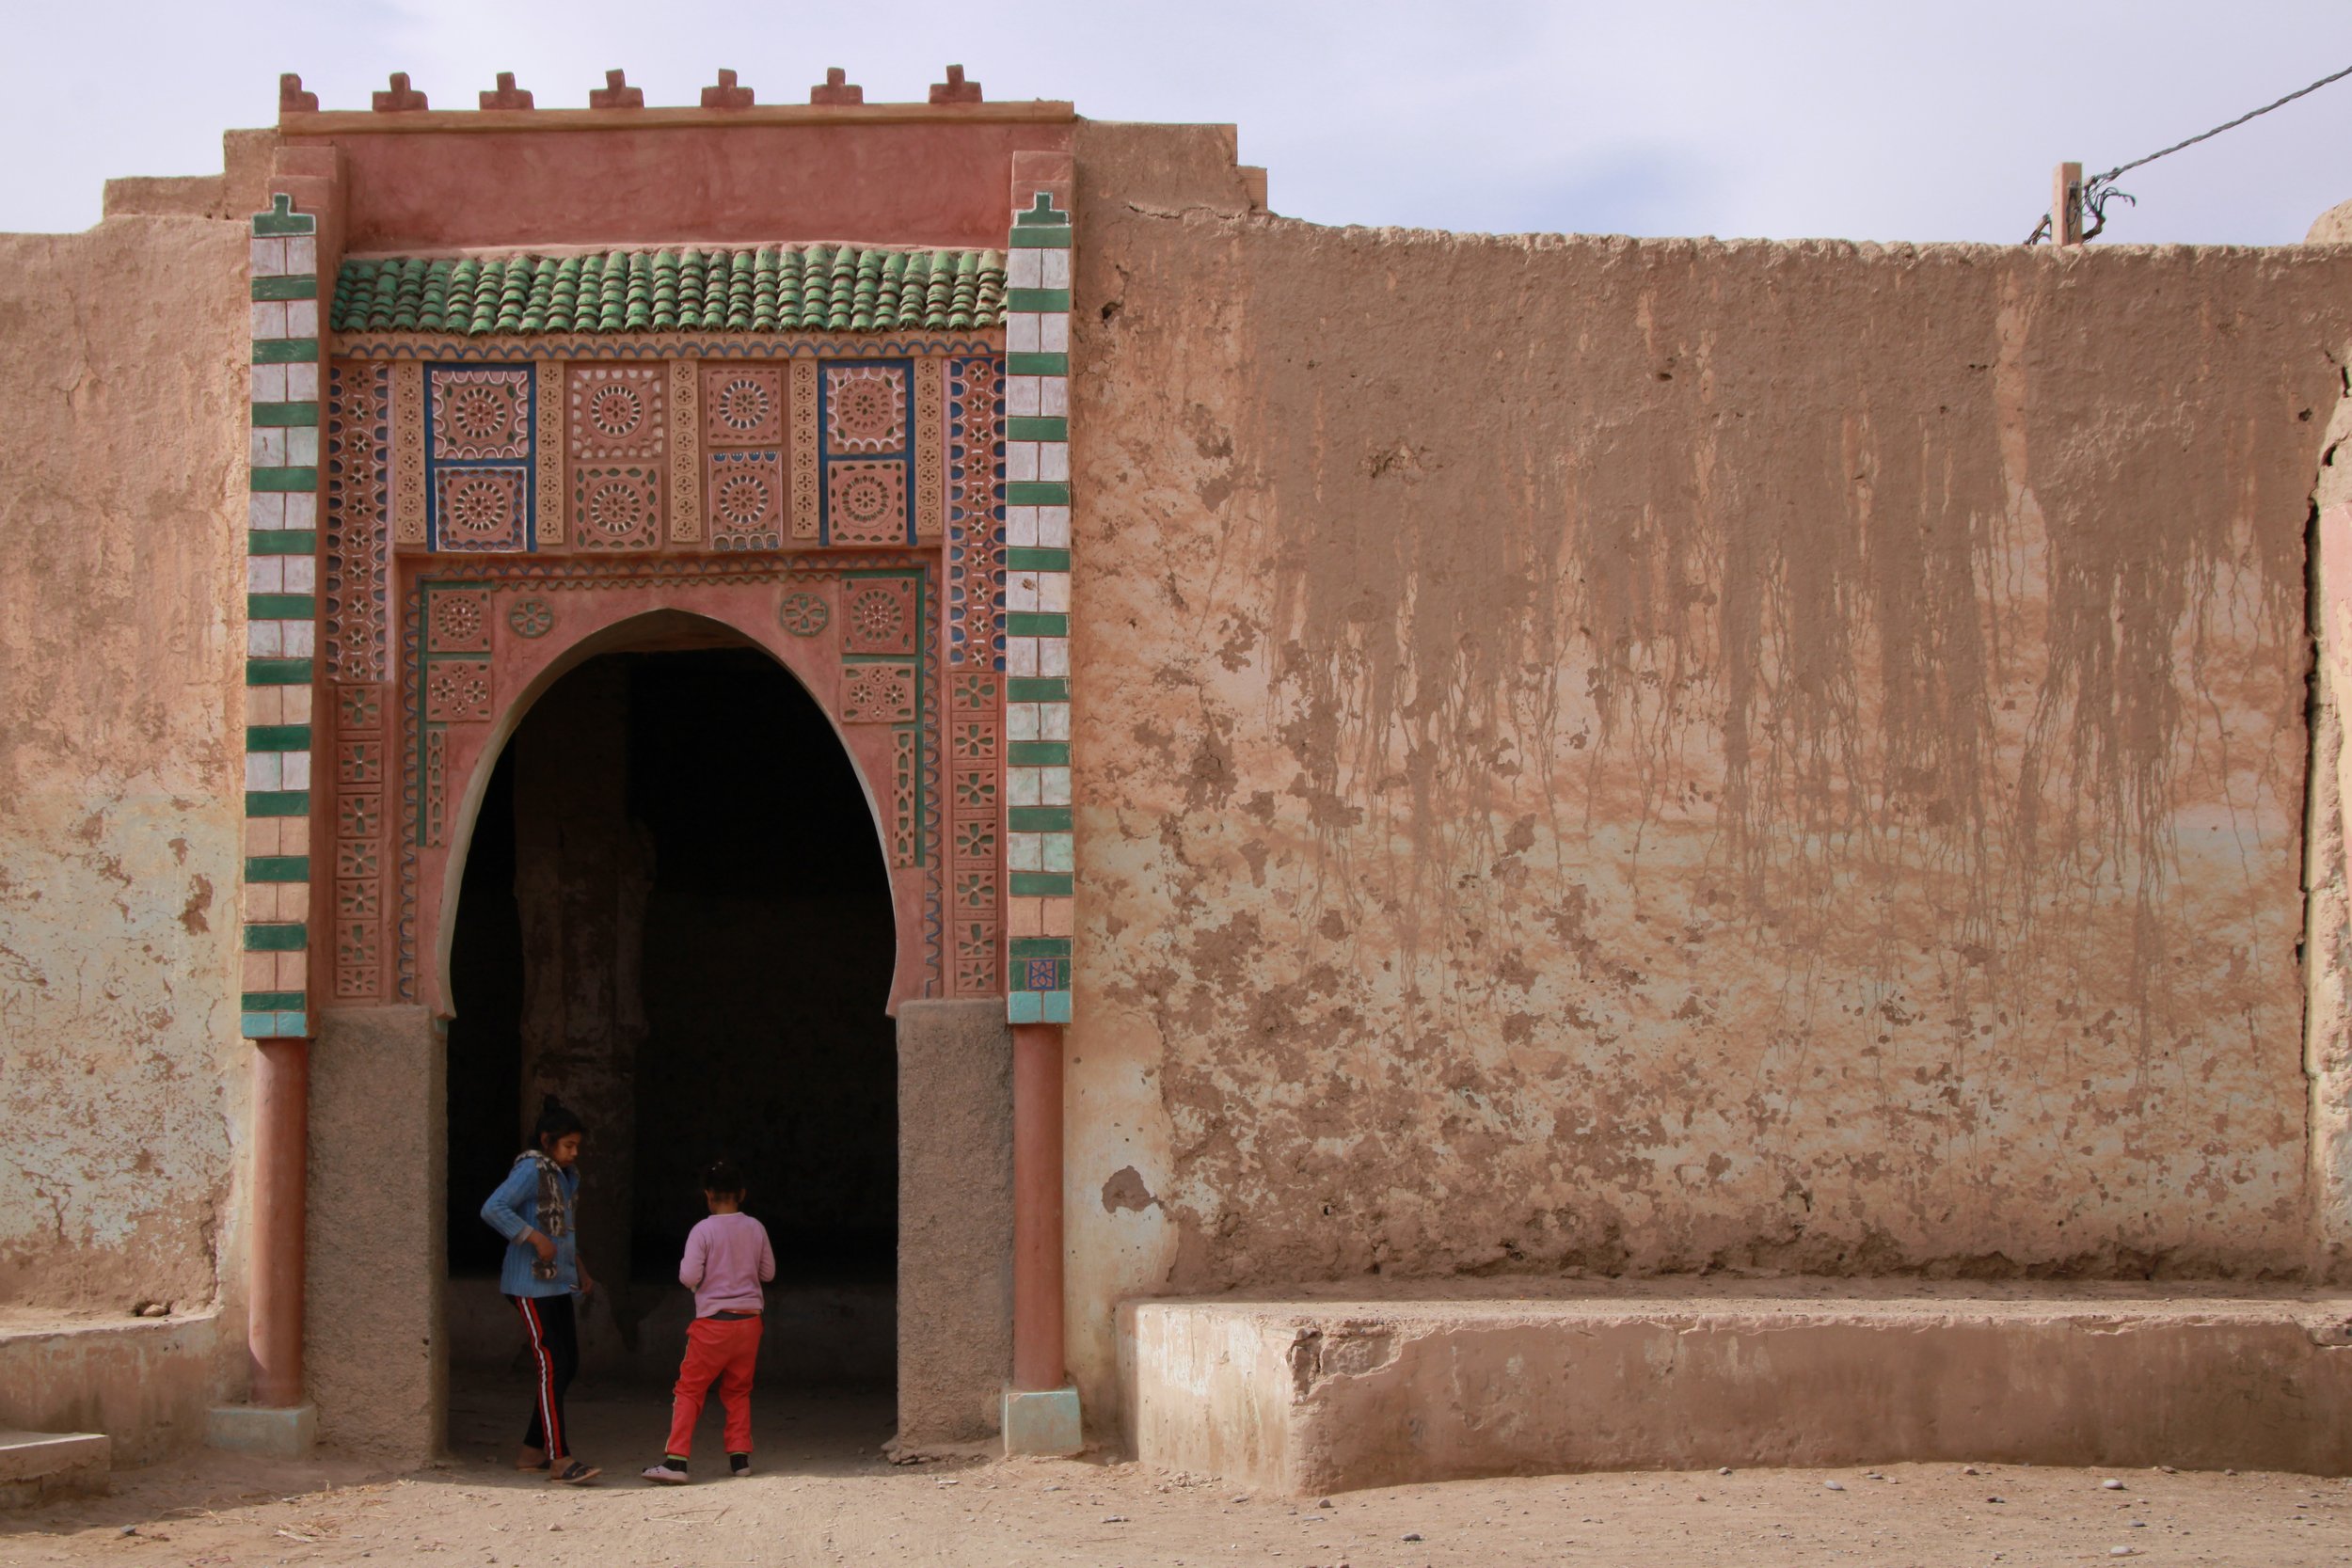  PICTURED: The doorway to a Kasbah. PC: Andrew Corbley © 